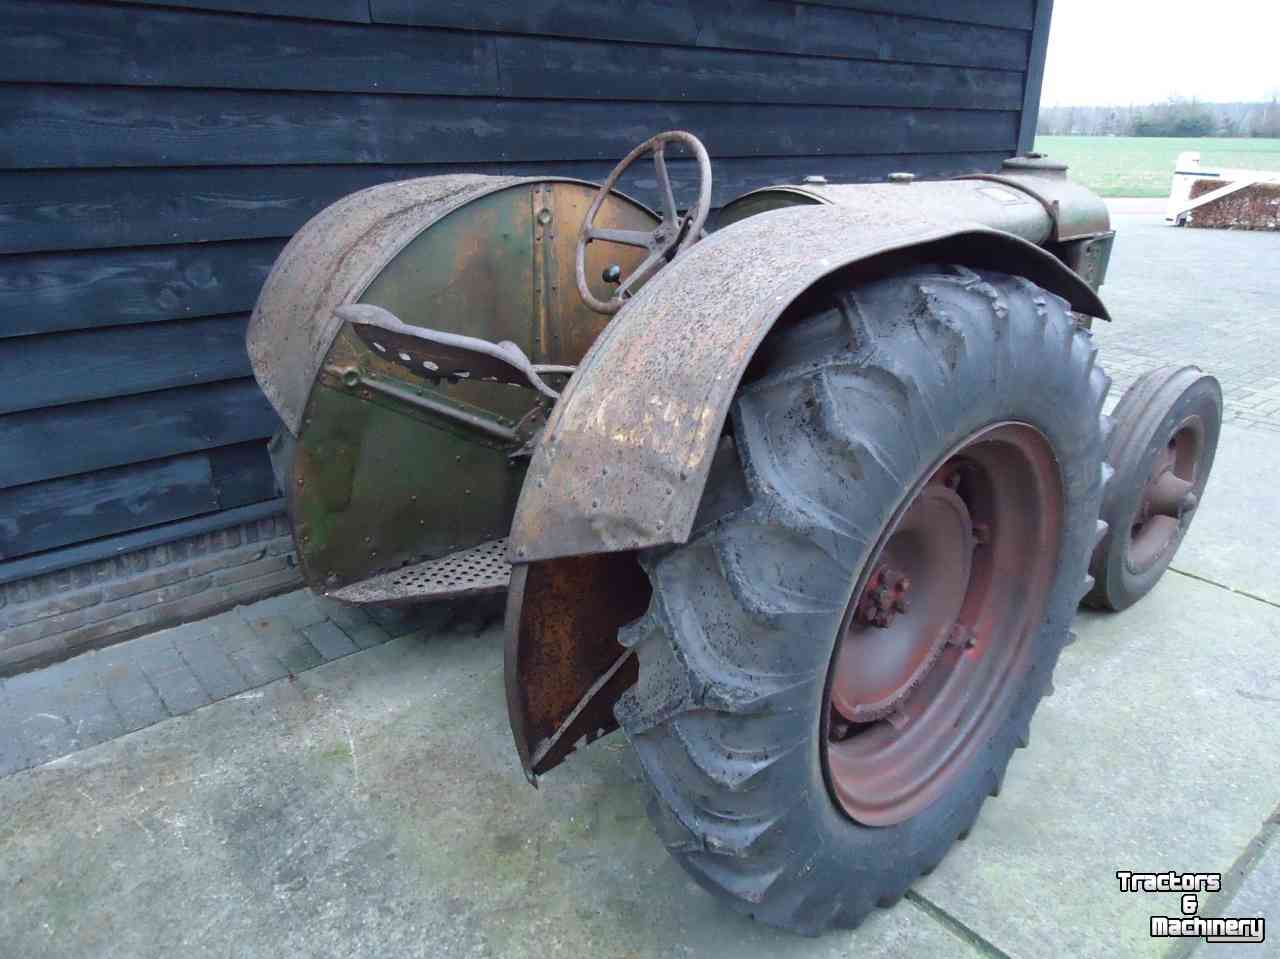 Tracteurs Fordson tractor